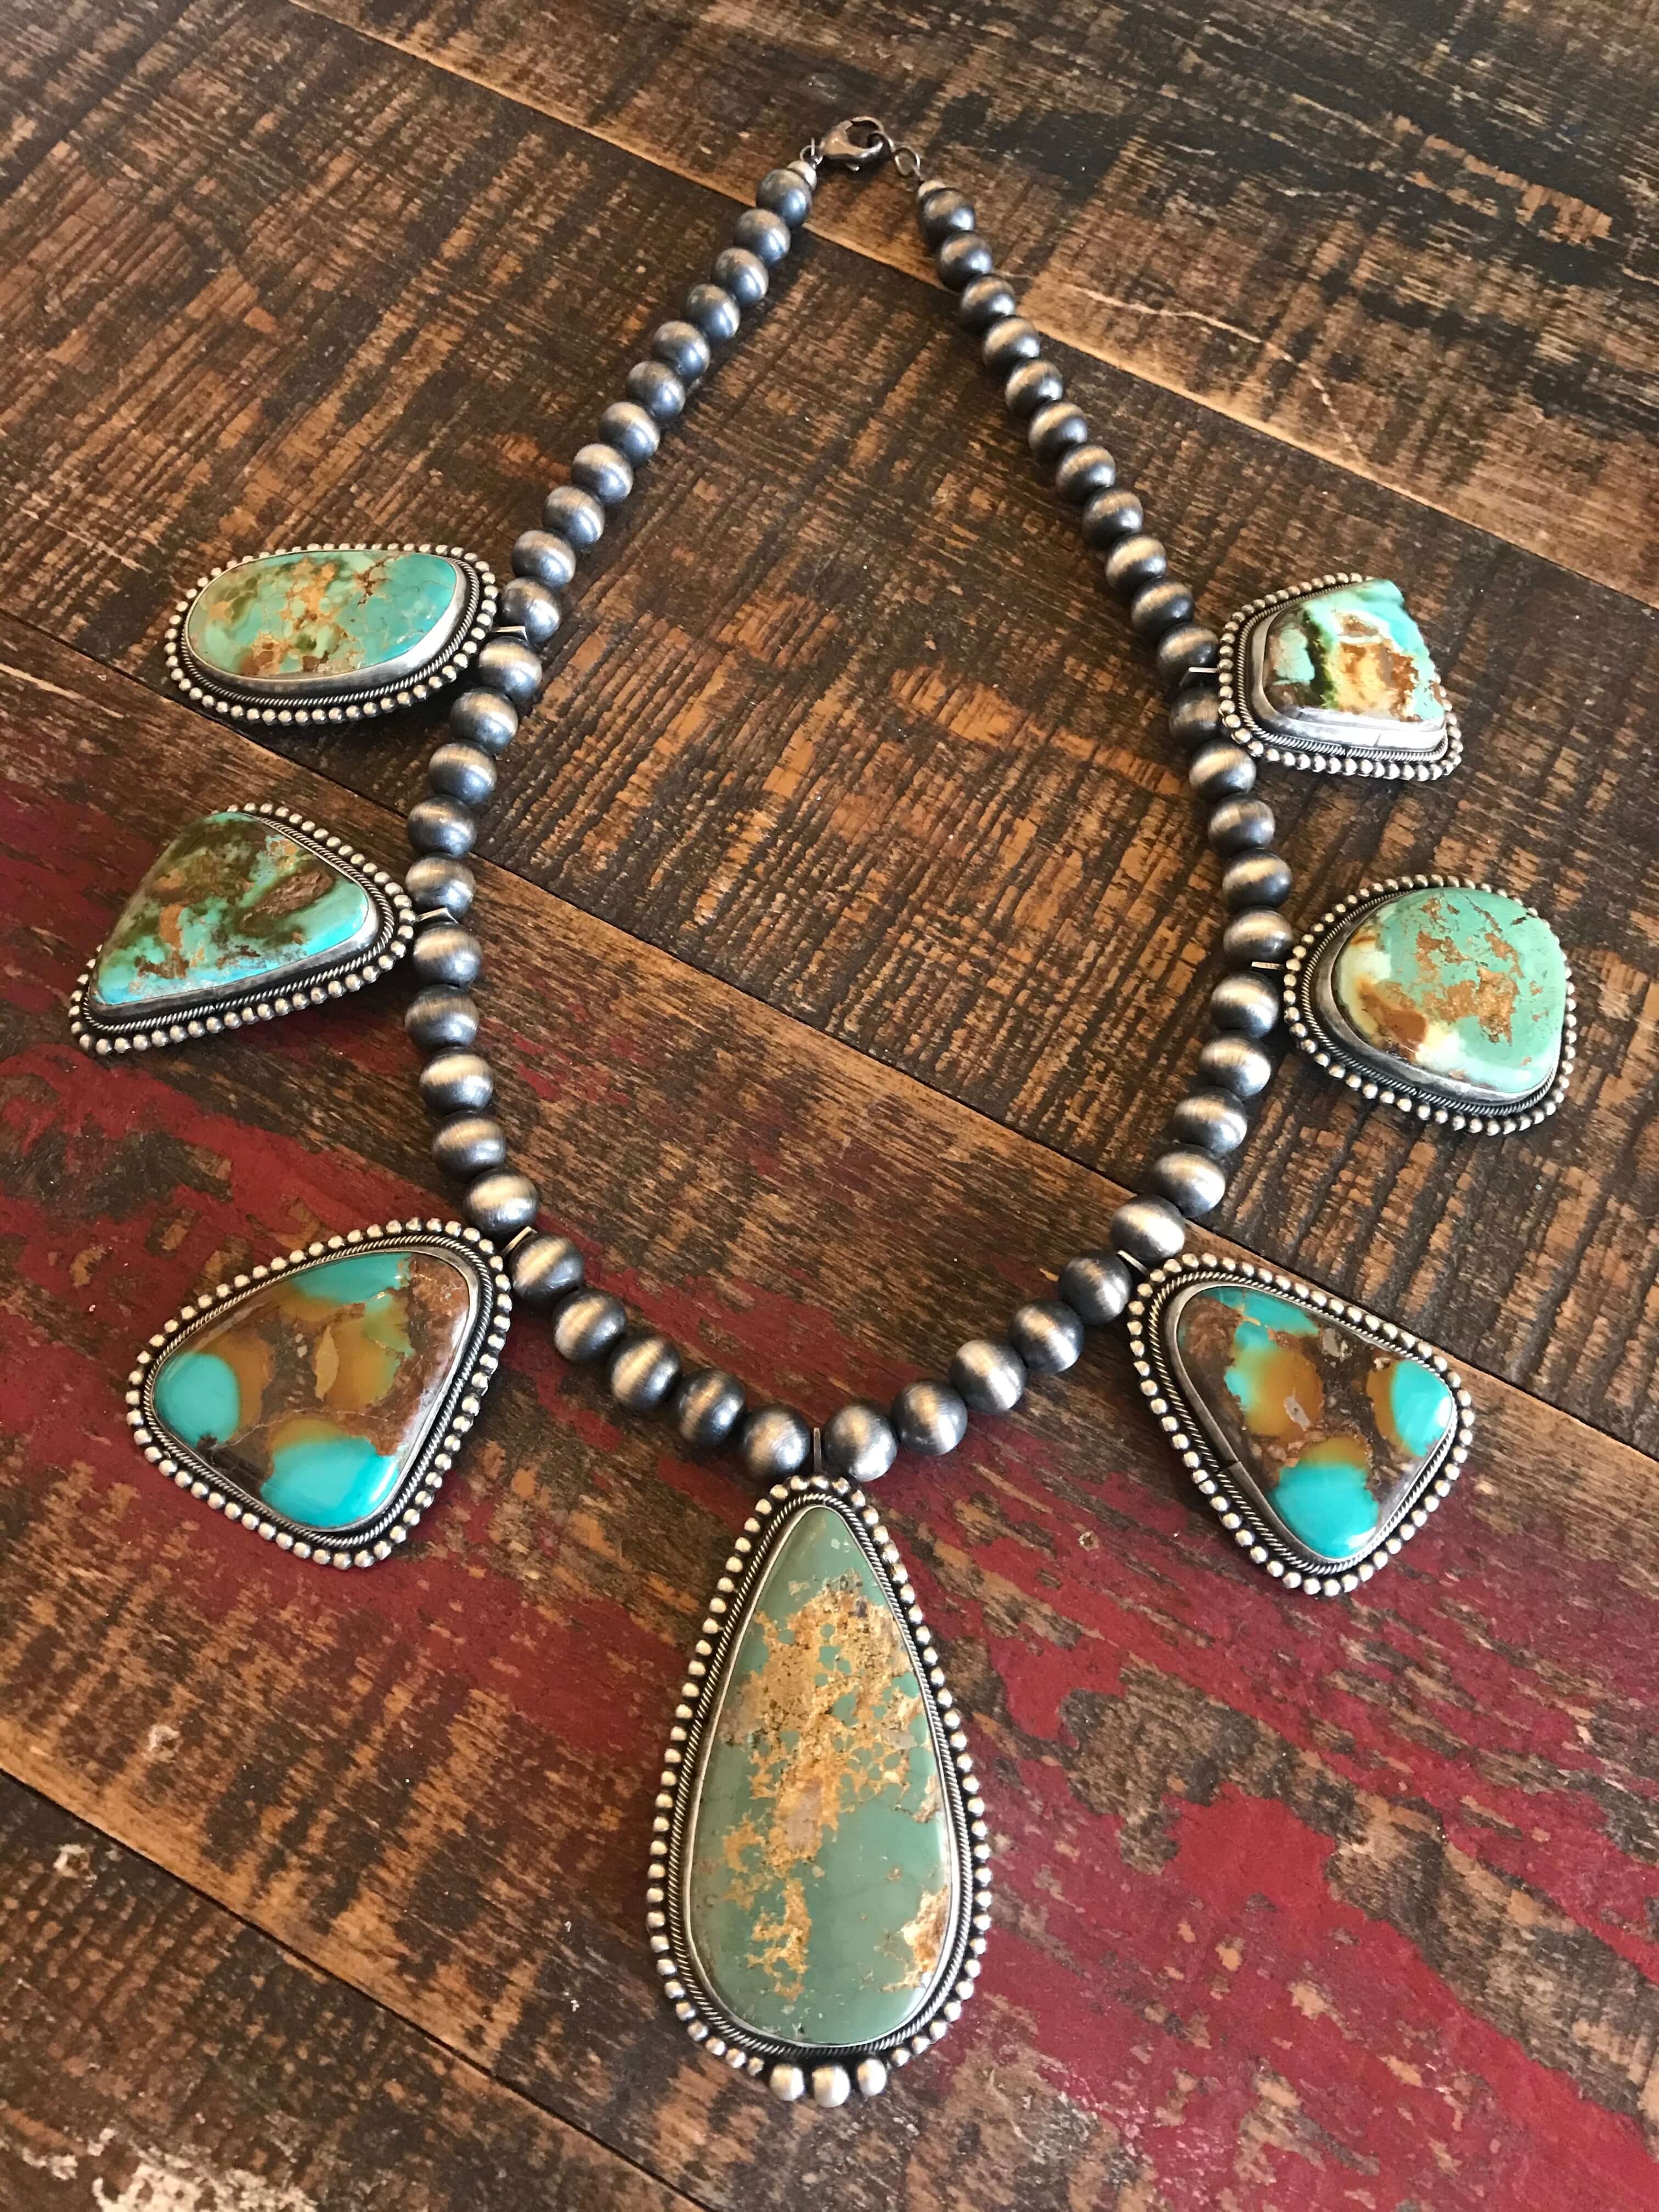 Vintage Turquoise Statement Necklace – Alex and Ani